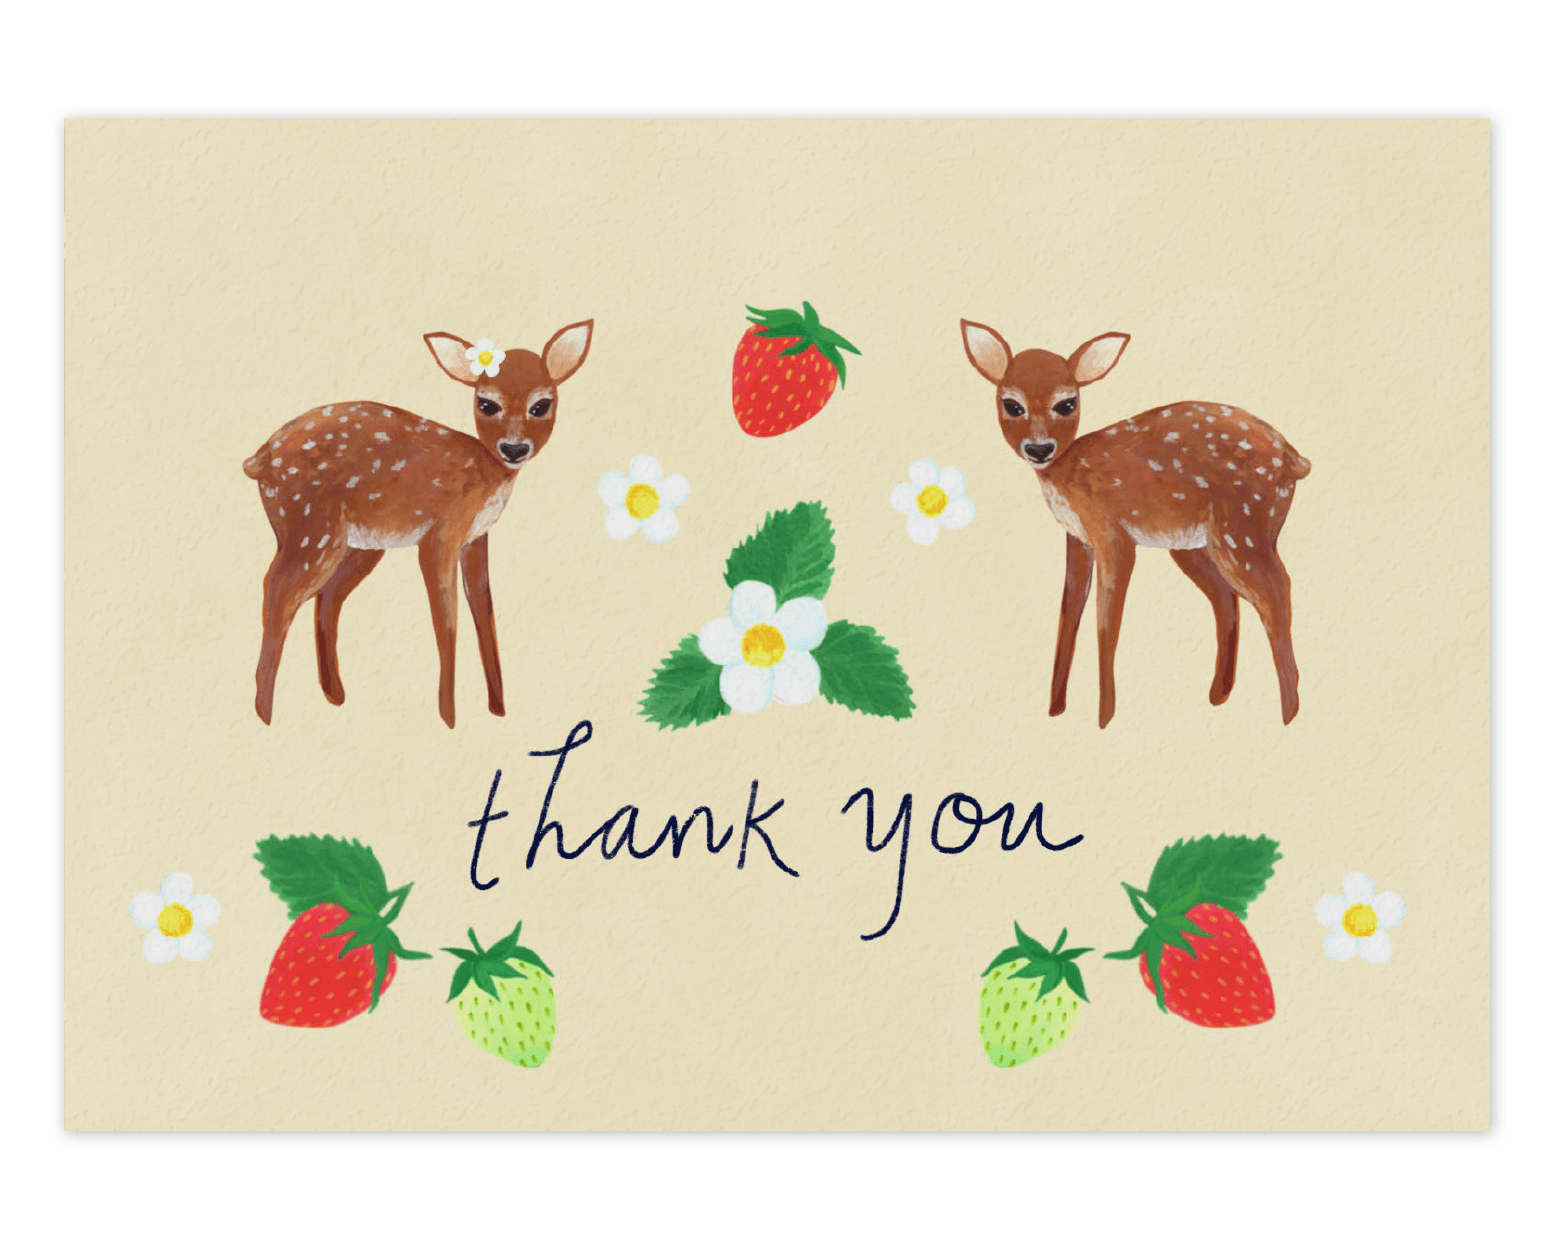 This card features two brown fawn facing each other with heads turned toward the viewer. Three white flowers fill the space between them, with the largest one in the center accompanied by three leaves jutting out on every end and two smaller ones on either side. A lone red strawberry looms above them. Below are the words "Thank You" written in cursive black ink with green, followed by red, strawberries and white flowers on either side. Printed on a cream colored background